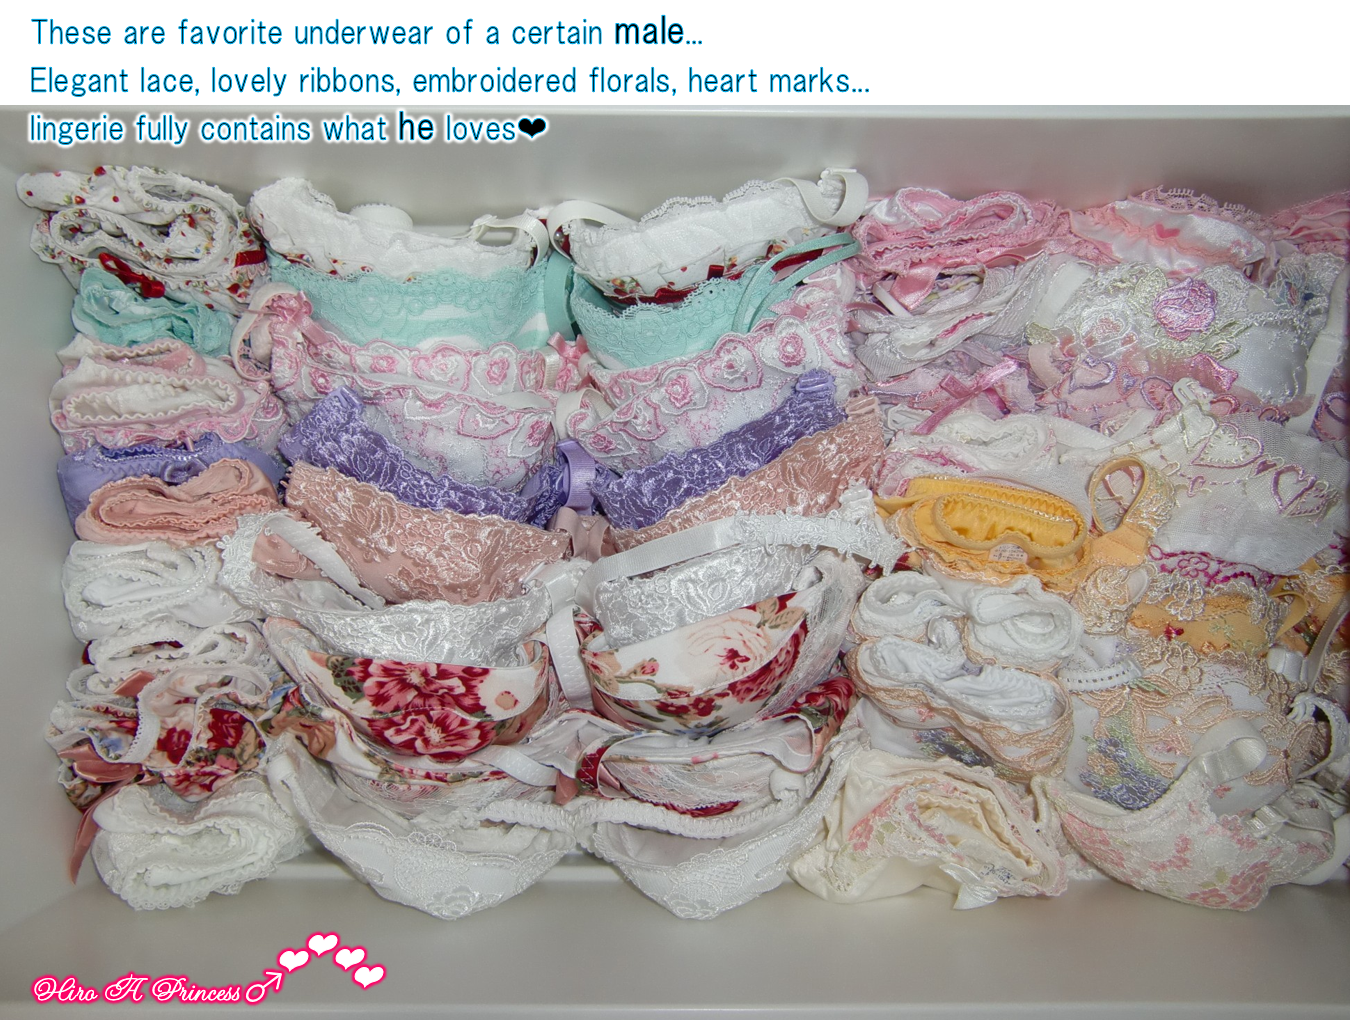 The favorite underwear of a certain male is lovely lingerie 2E